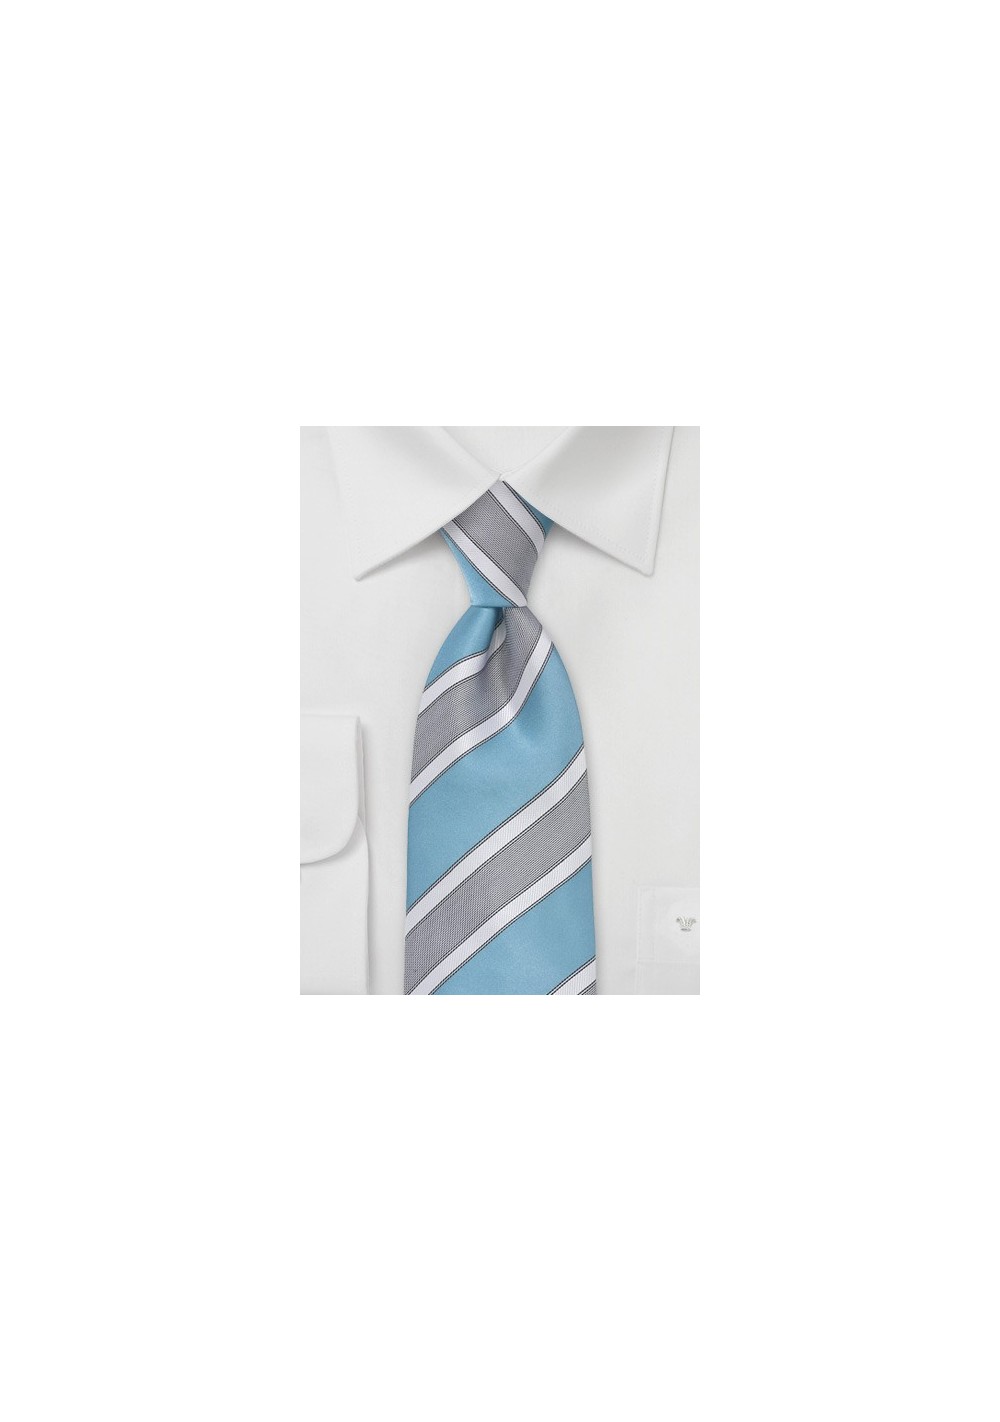 Striped Tie in Adriatic Blue Made for Kids